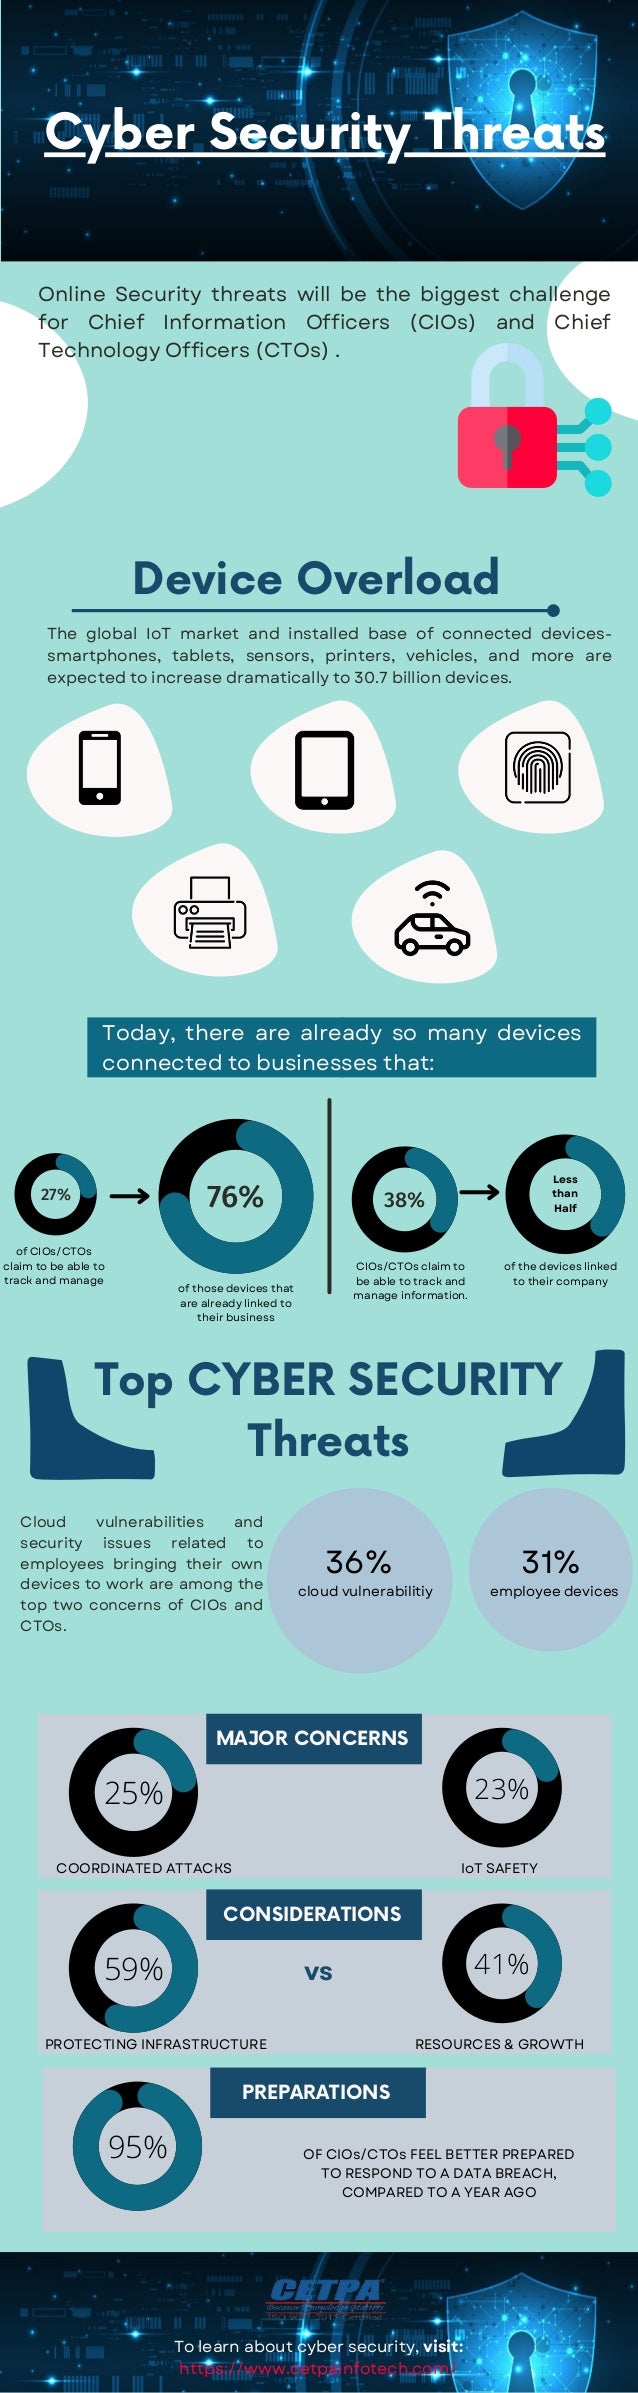 27%
The global IoT market and installed base of connected devices-
smartphones, tablets, sensors, printers, vehicles, and more are
expected to increase dramatically to 30.7 billion devices.
Device Overload
76% 38%
25% 23%
59% 41%
95%
Cyber Security Threats
Online Security threats will be the biggest challenge
for Chief Information Officers (CIOs) and Chief
Technology Officers (CTOs) .
Today, there are already so many devices
connected to businesses that:
Less
than
Half
Top CYBER SECURITY
Threats
36% 31%
cloud vulnerabilitiy employee devices
MAJOR CONCERNS
COORDINATED ATTACKS IoT SAFETY
CONSIDERATIONS
PROTECTING INFRASTRUCTURE RESOURCES & GROWTH
vs
PREPARATIONS
OF CIOs/CTOs FEEL BETTER PREPARED
TO RESPOND TO A DATA BREACH,
COMPARED TO A YEAR AGO
To learn about cyber security, visit:
https://www.cetpainfotech.com/
of CIOs/CTOs
claim to be able to
track and manage
of those devices that
are already linked to
their business
CIOs/CTOs claim to
be able to track and
manage information.
of the devices linked
to their company
Cloud vulnerabilities and
security issues related to
employees bringing their own
devices to work are among the
top two concerns of CIOs and
CTOs.
 